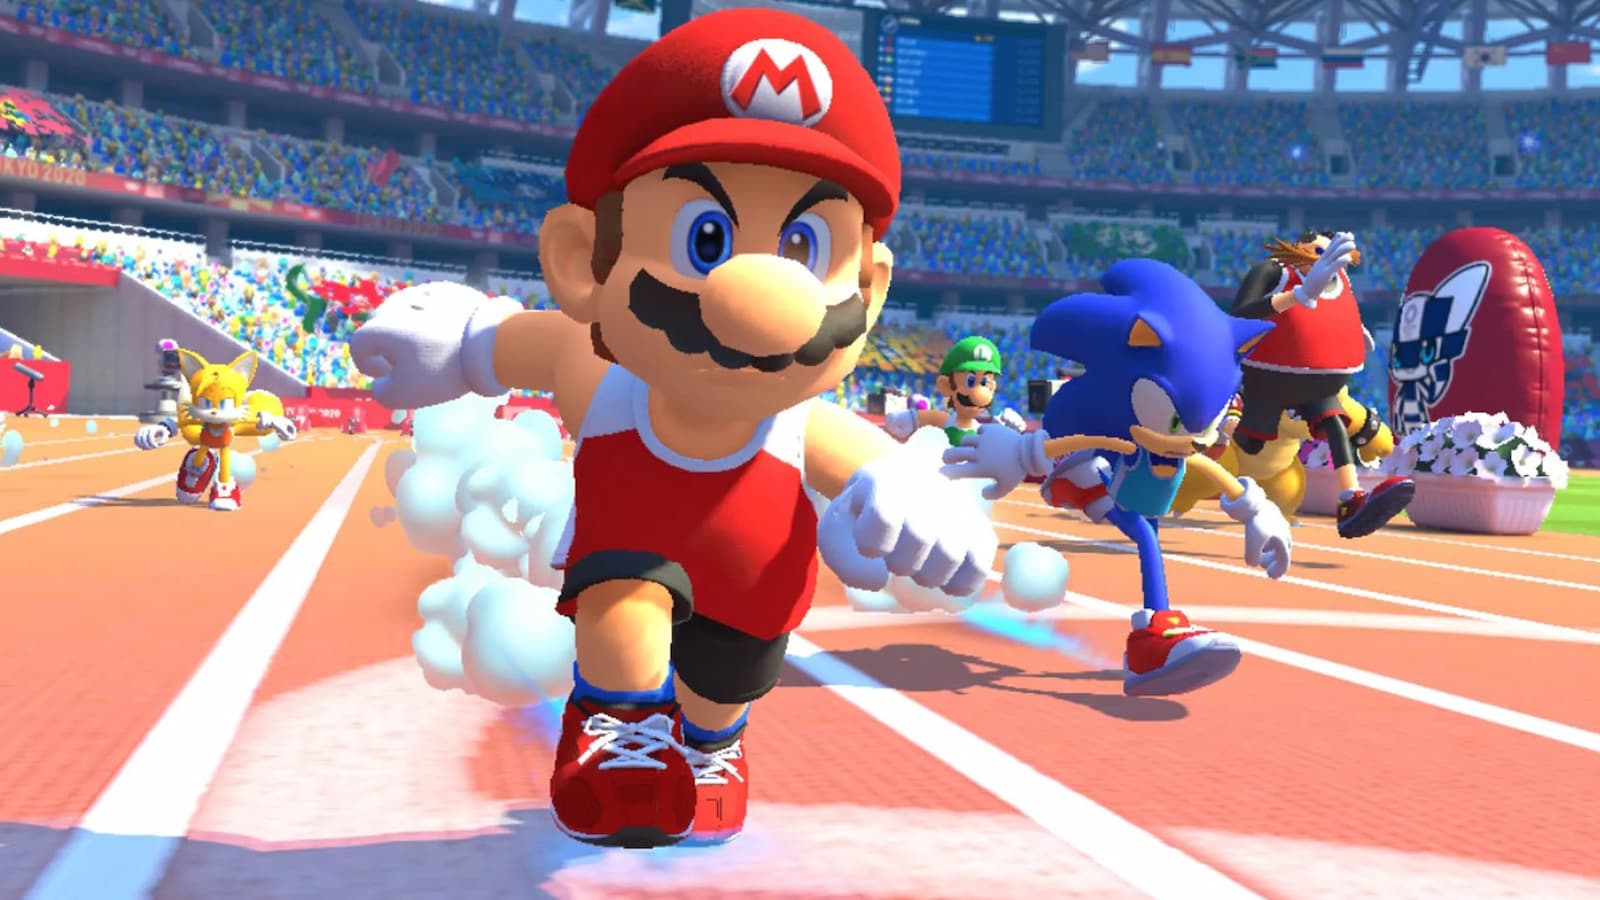 Mario beating Sonic in race at the Olympics